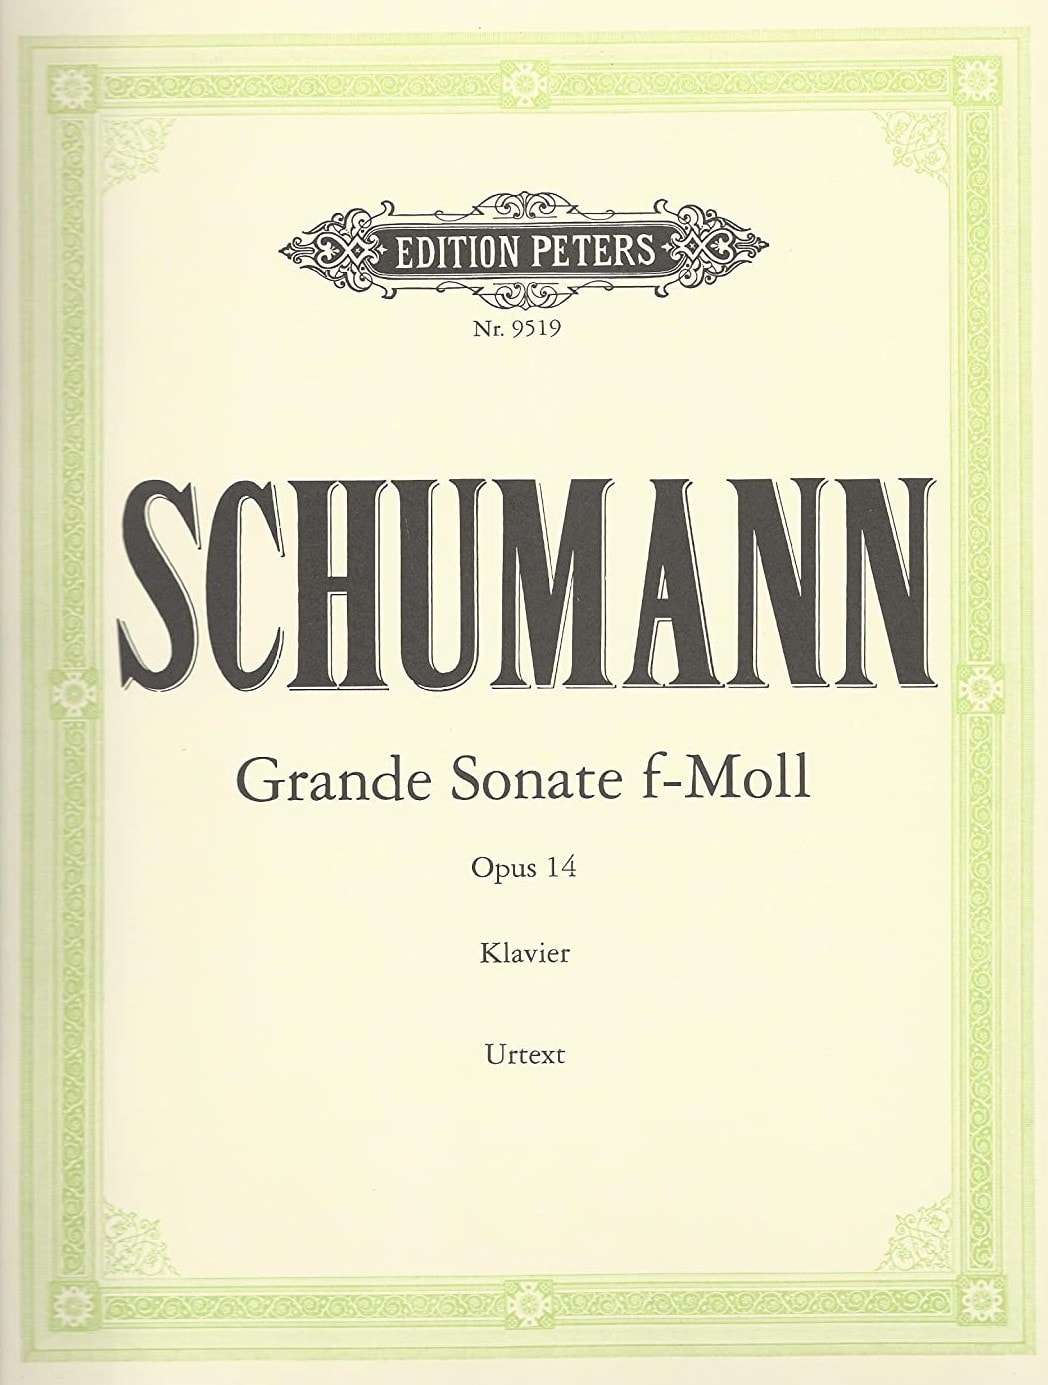 Schumann: Sonata in F Minor Opus 14 for Piano published by Peters